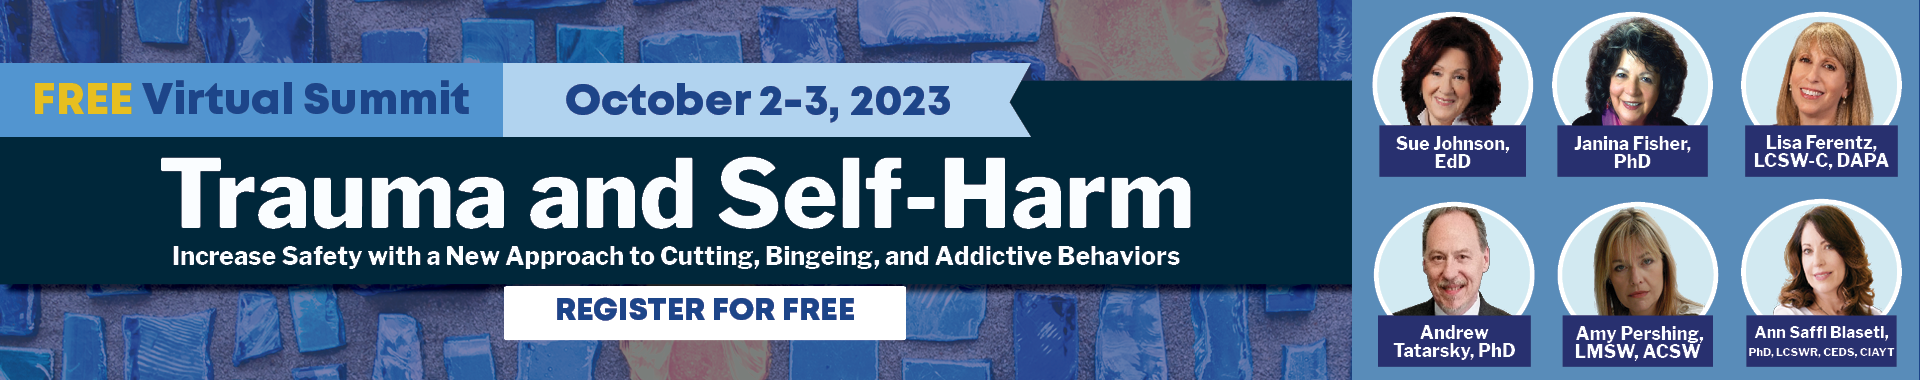 Trauma and Self-Harm: Increase Safety with a New Approach to Cutting, Bingeing, and Addictive Behaviors